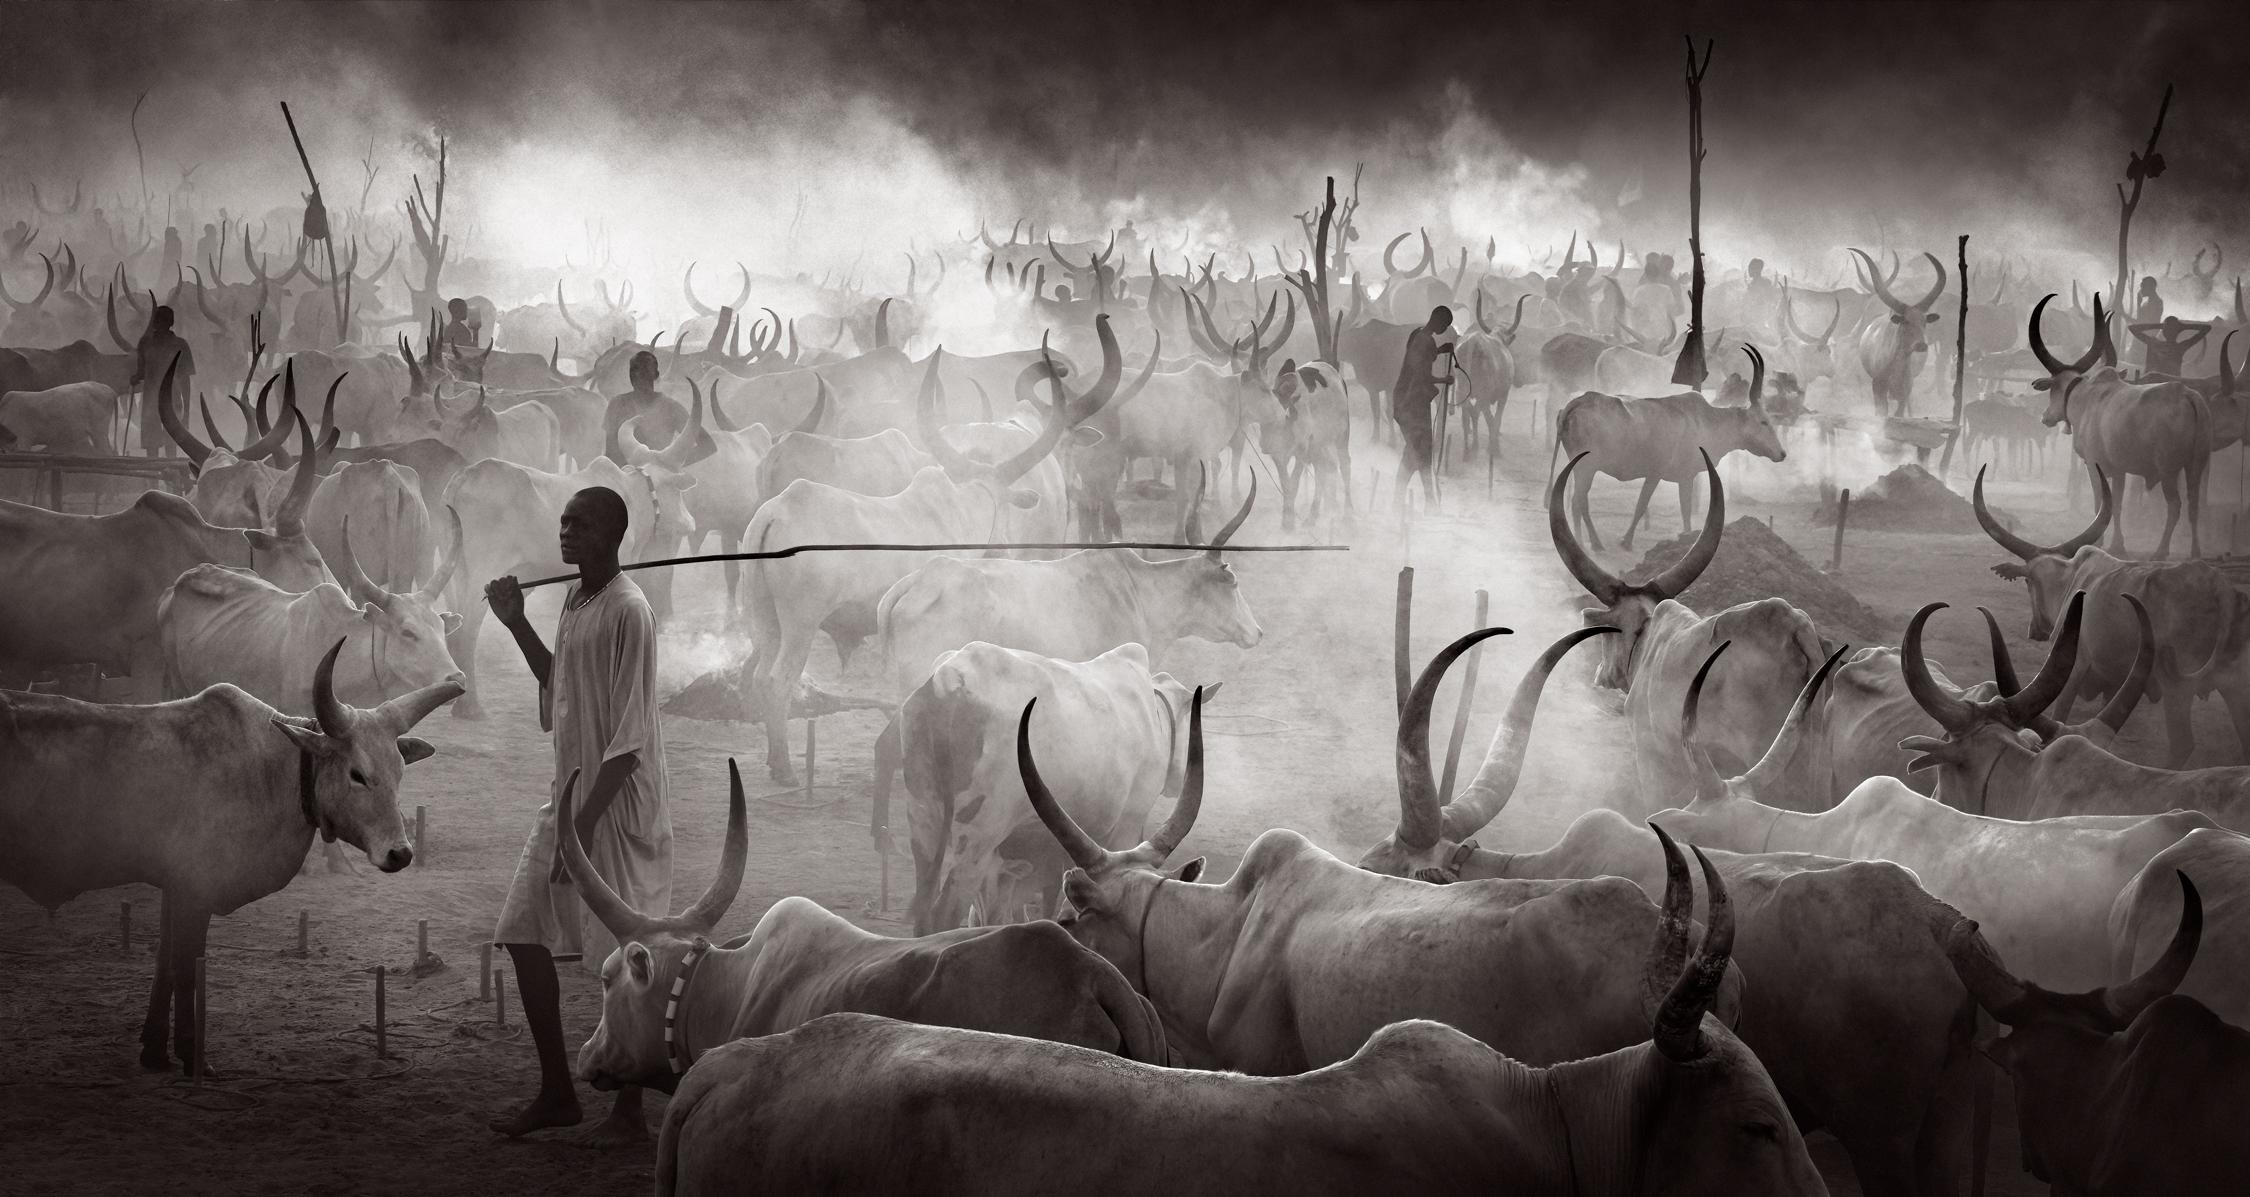 Drew Doggett Black and White Photograph - Surreal Scene of Life Among the Cattle Camps in South Sudan, with Long-Horned Ca